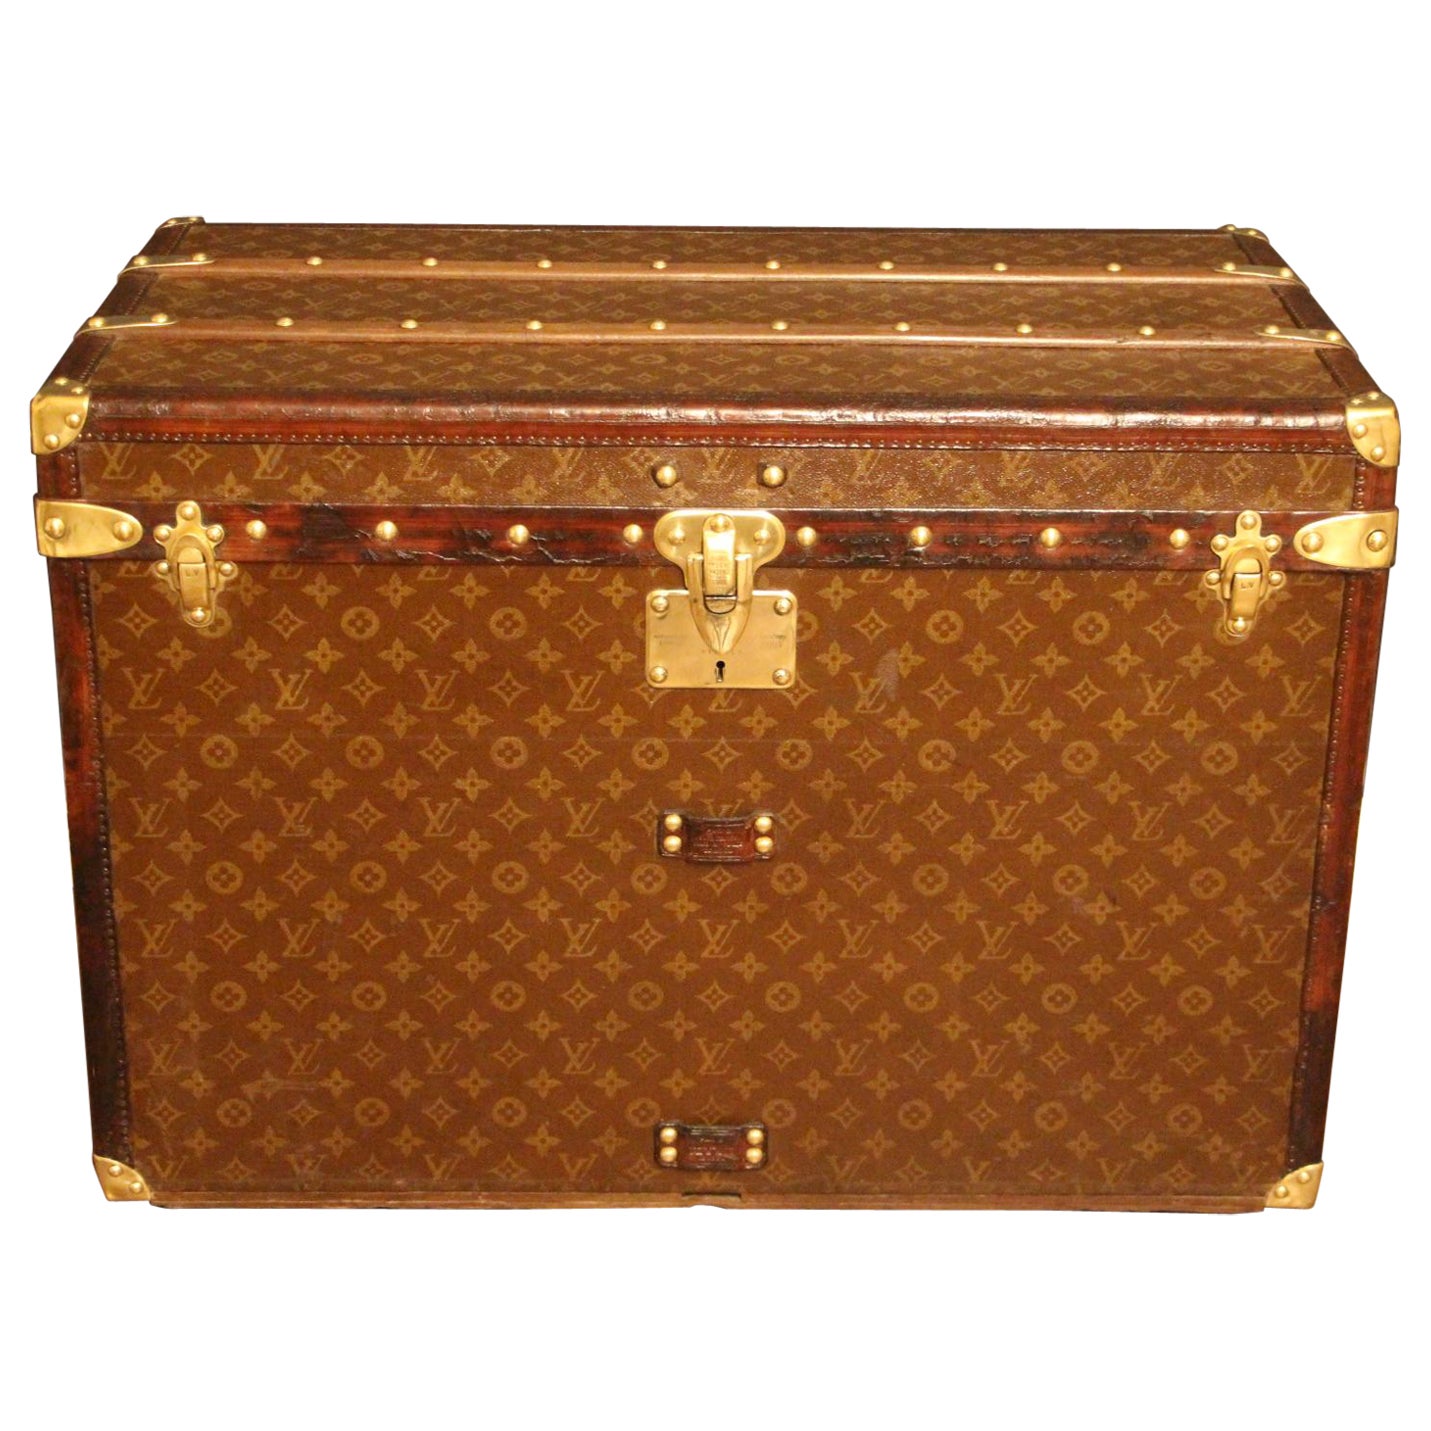 Louis Vuitton Case Pieces and Storage Cabinets - 8 For Sale at